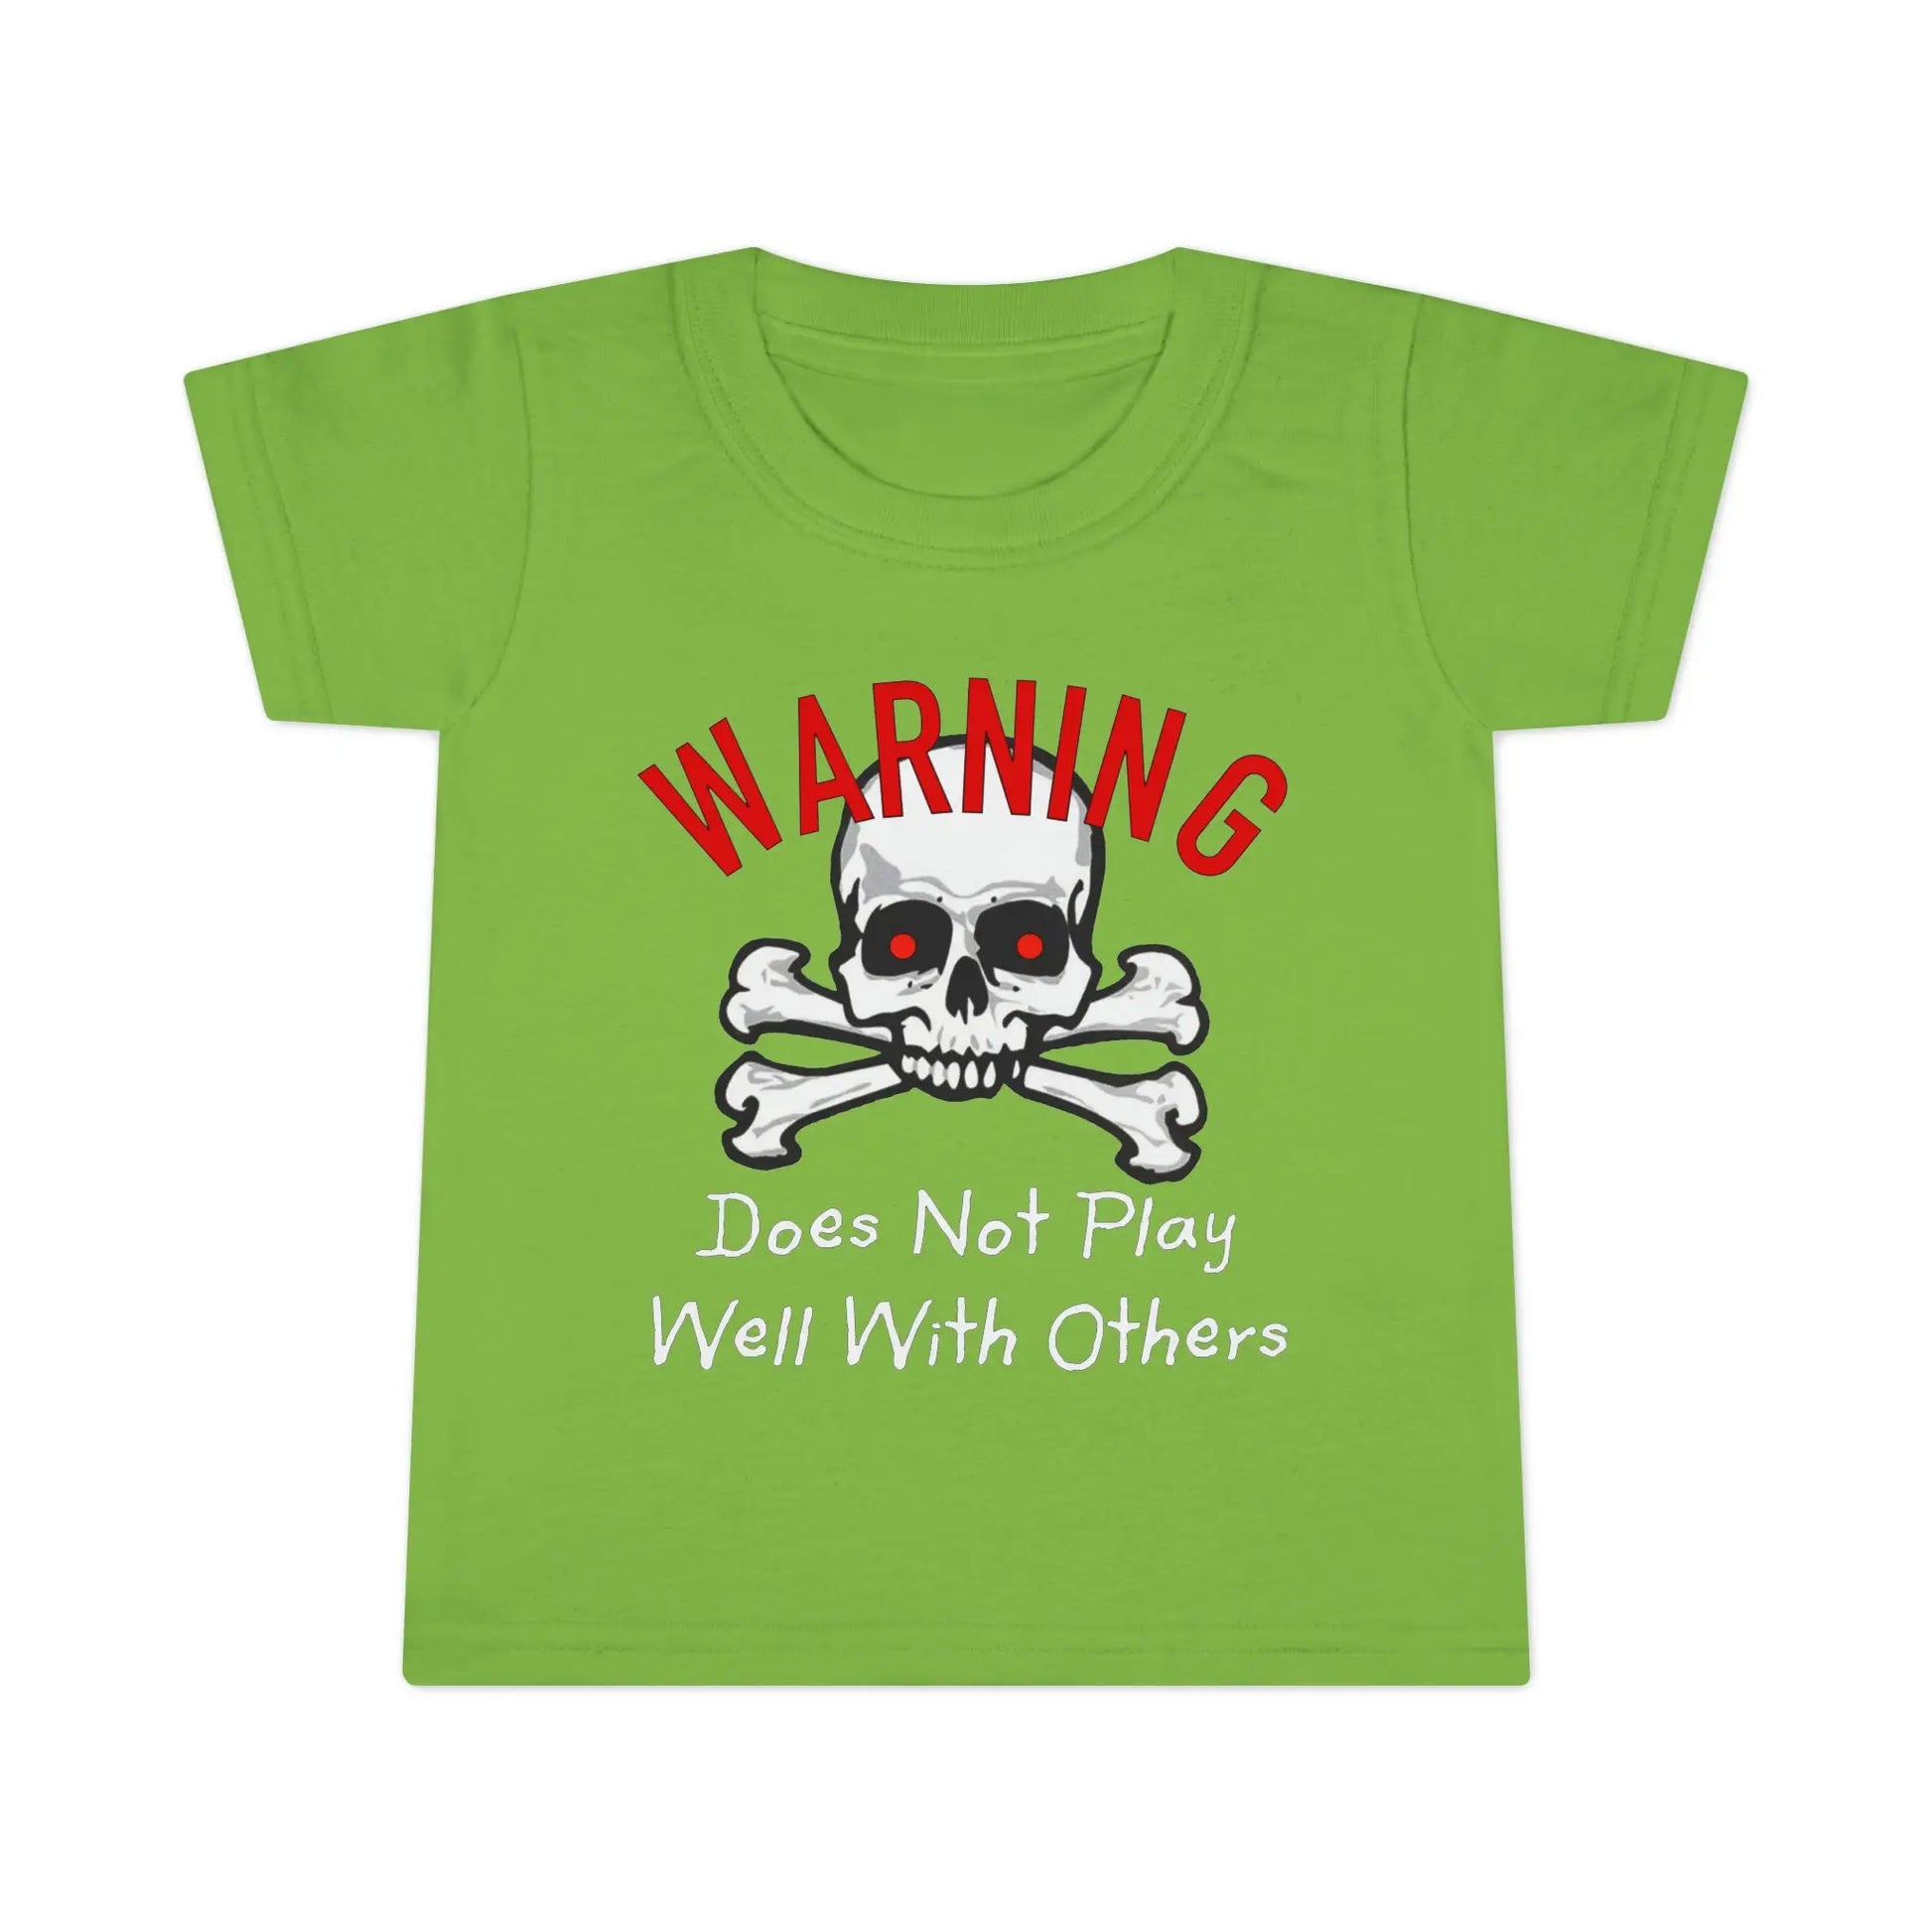 Warning Does Not Play Well With Others Toddler T-shirt - Wicked Tees